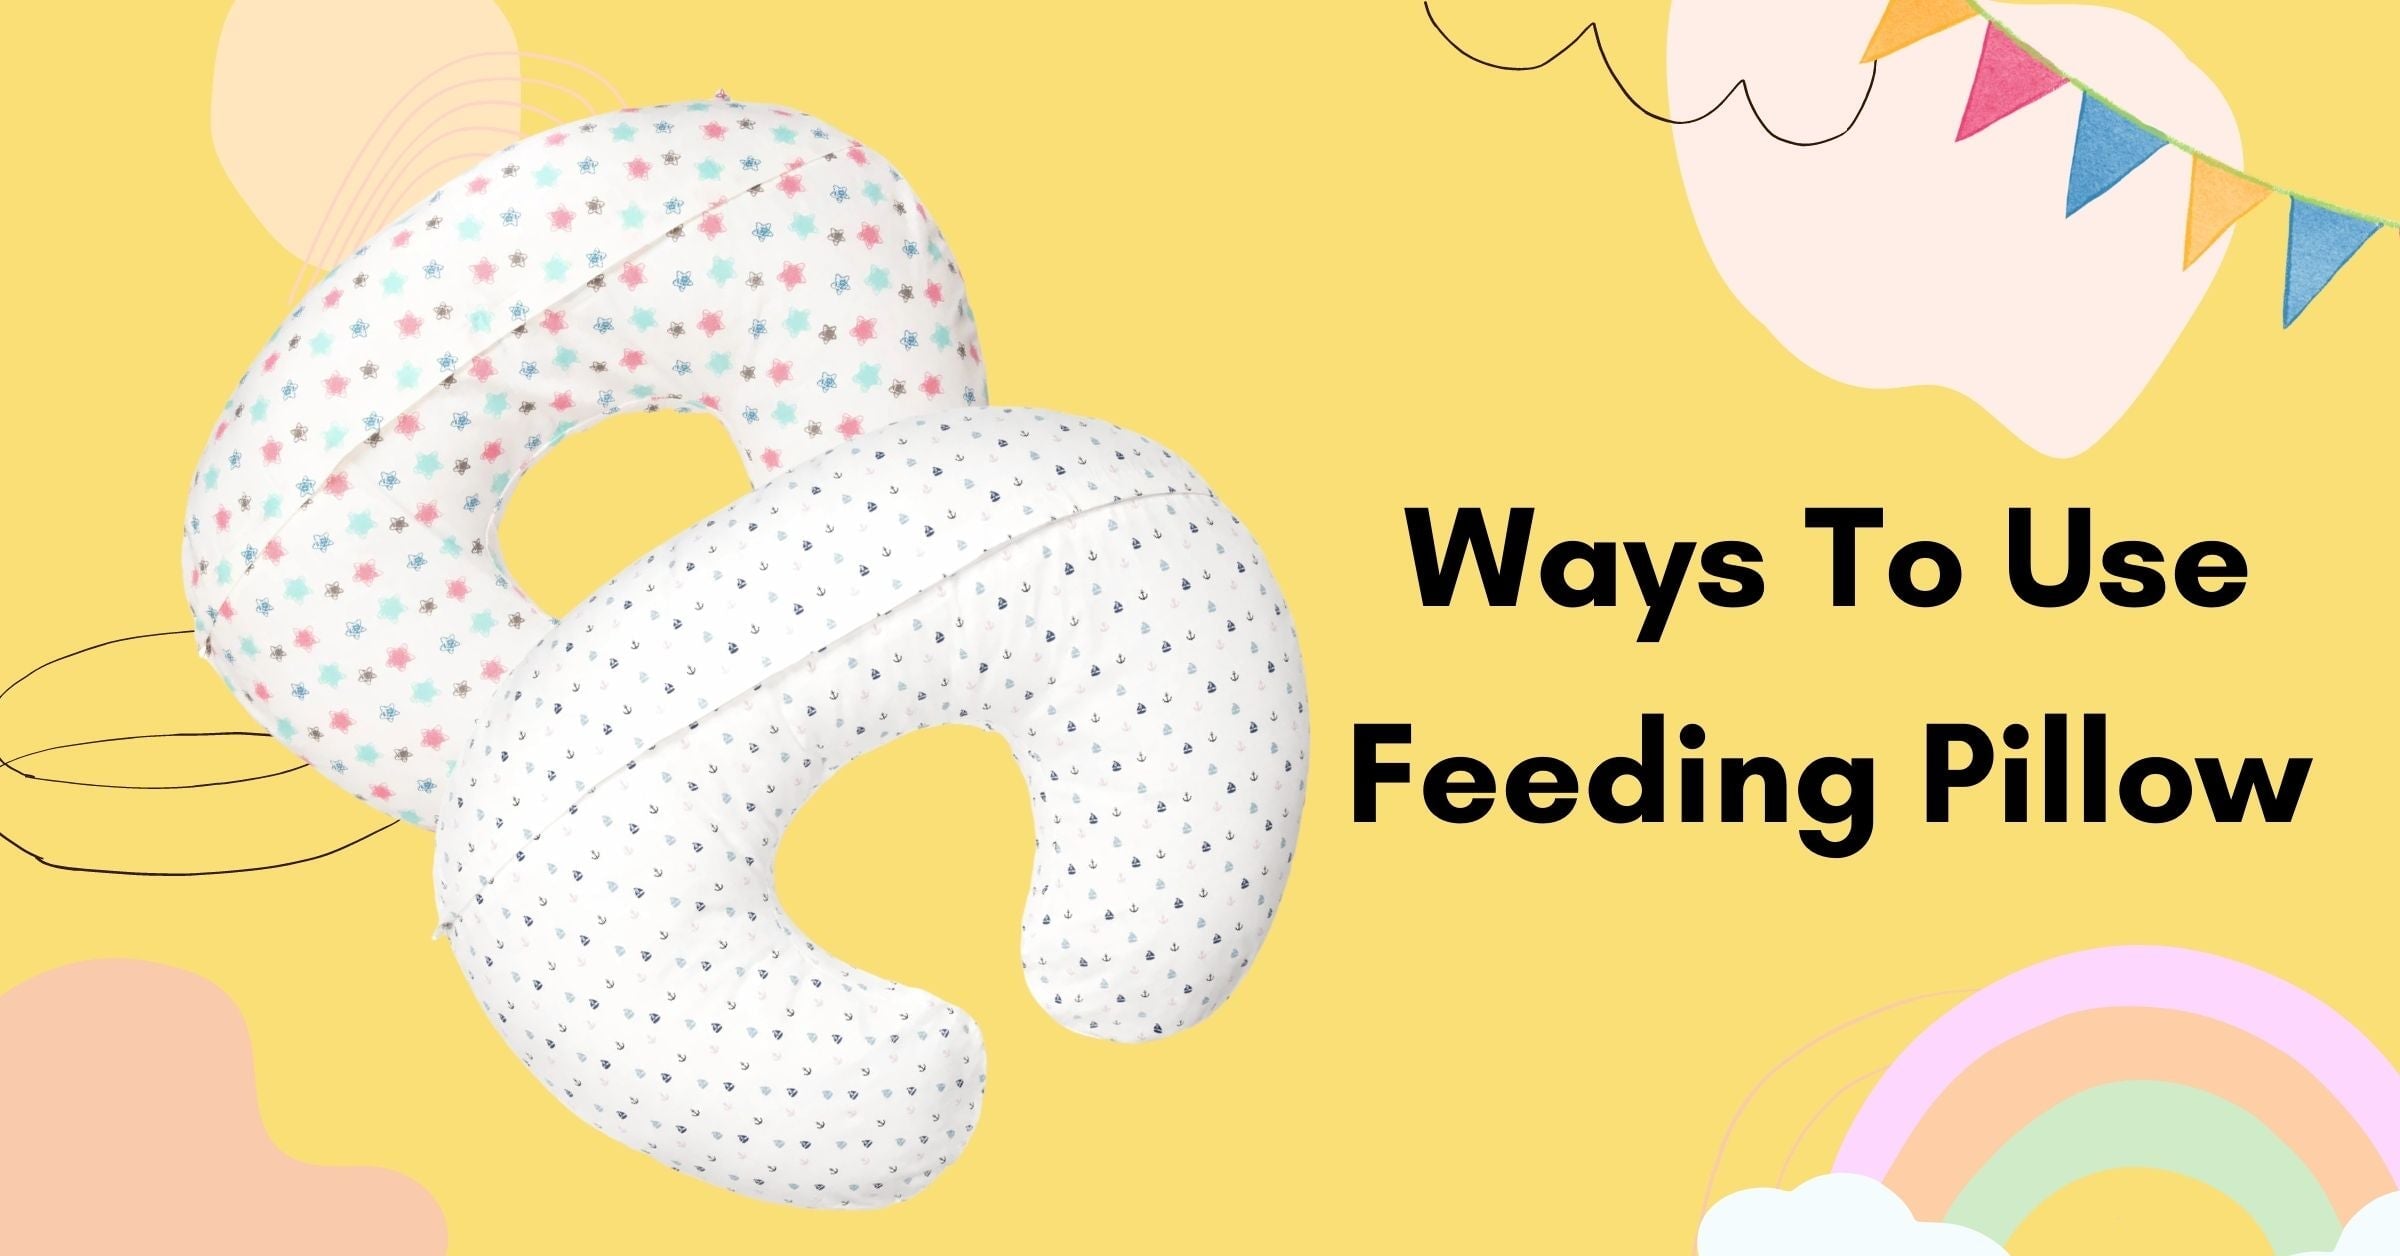 5 Ways To Use Feeding Pillow- Get Your Value For Money